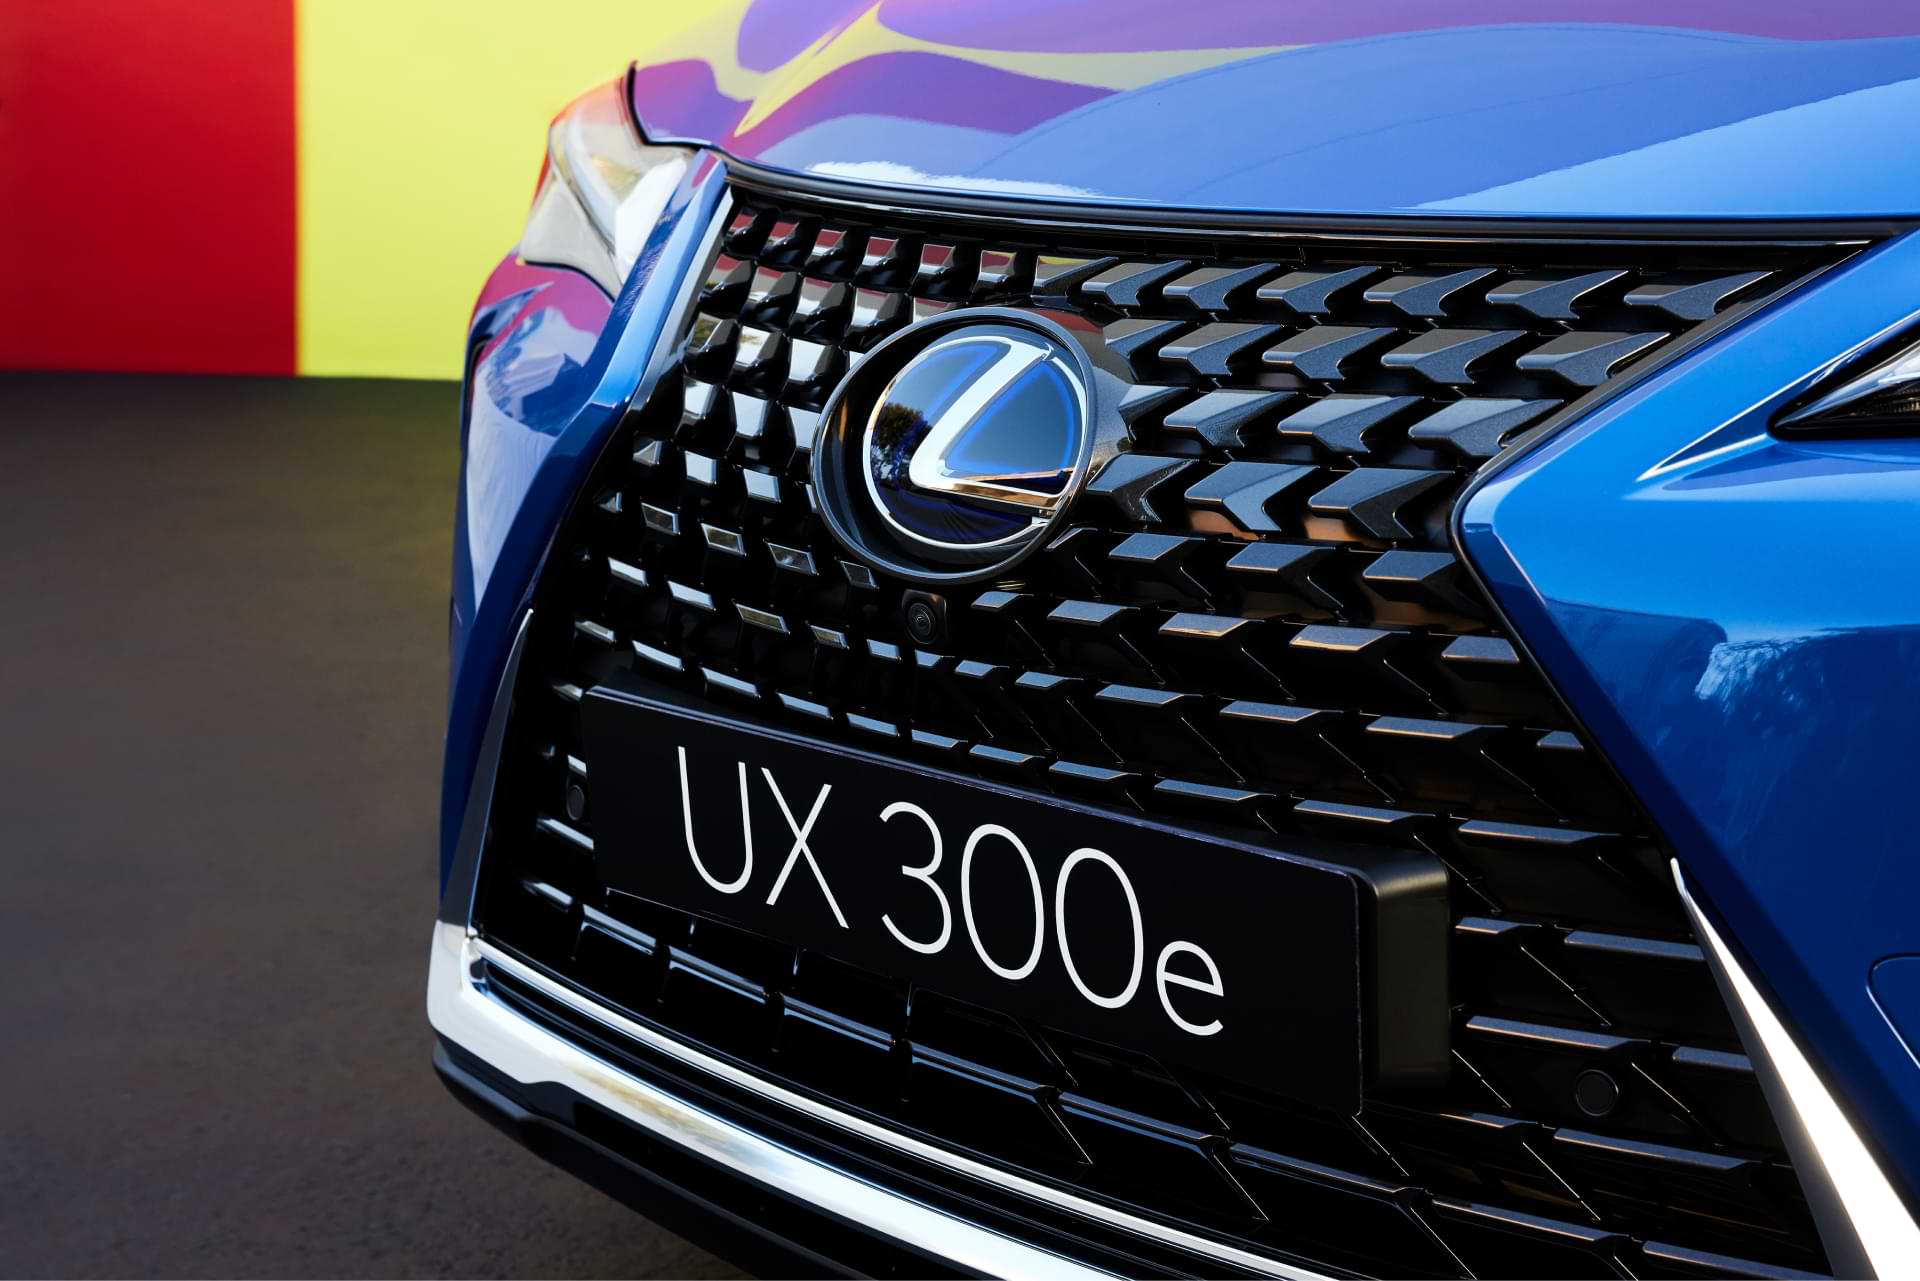 The spindle grille and number plate of the blue UX 300e